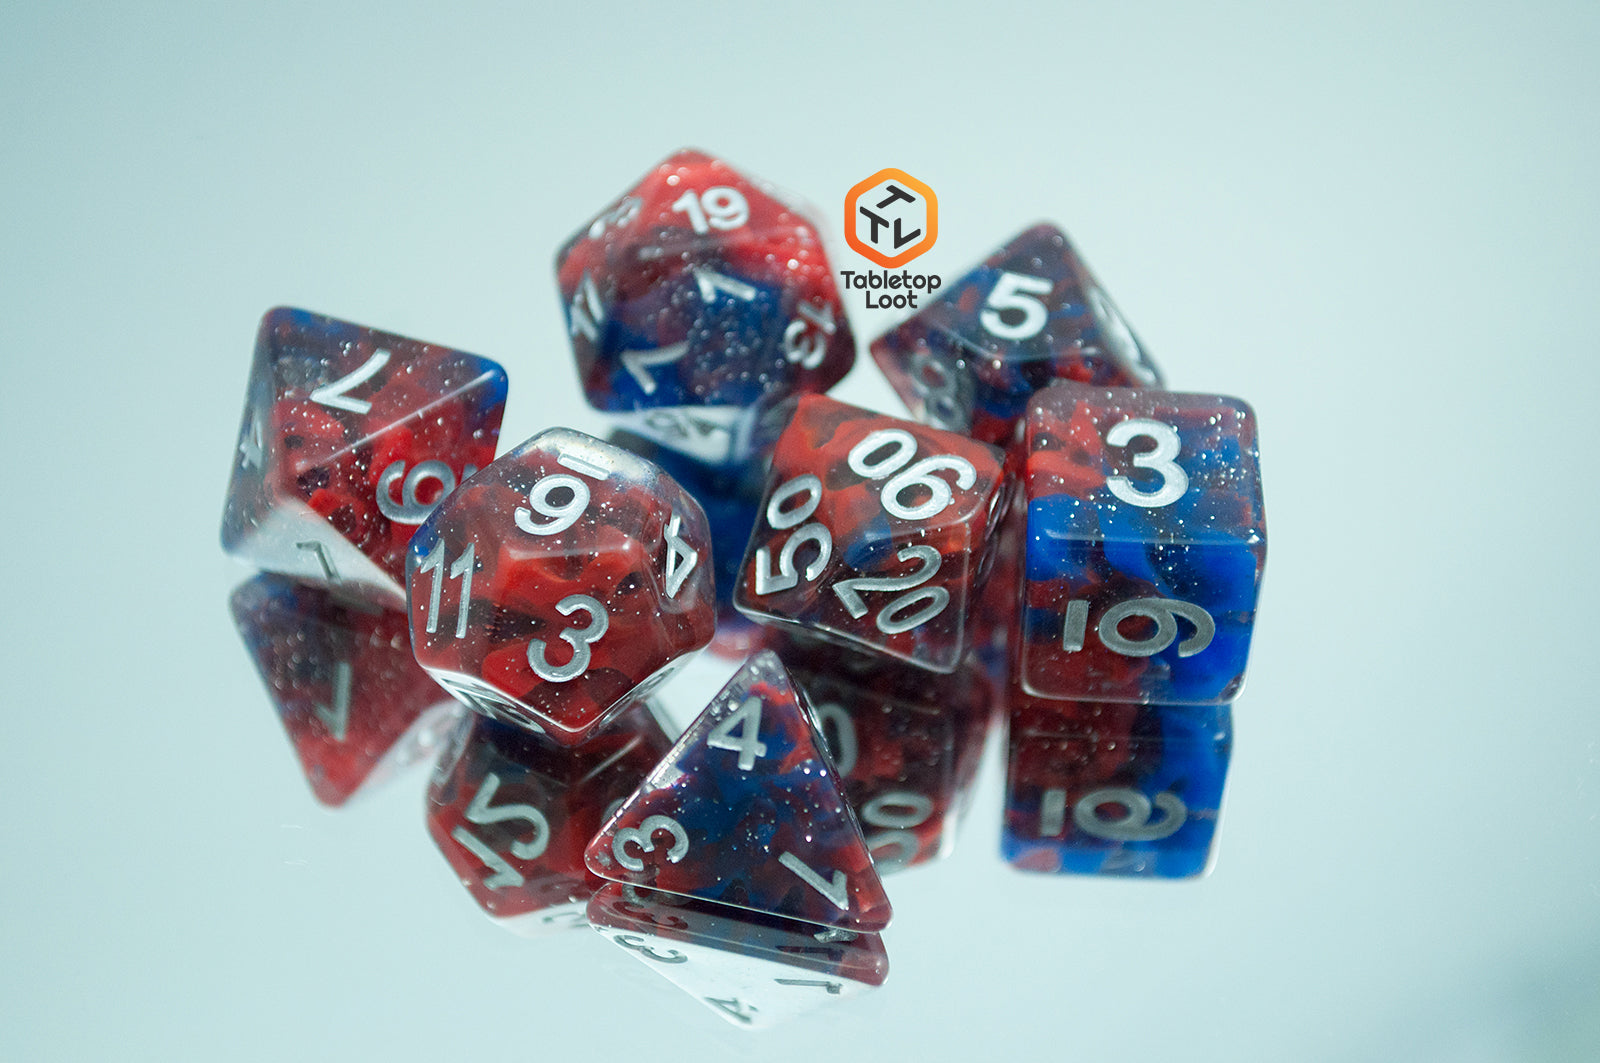 The Fire and Ice 7 piece dice set from Tabletop Loot with swirls of blue and red in a clear glittery resin and silver numbering.